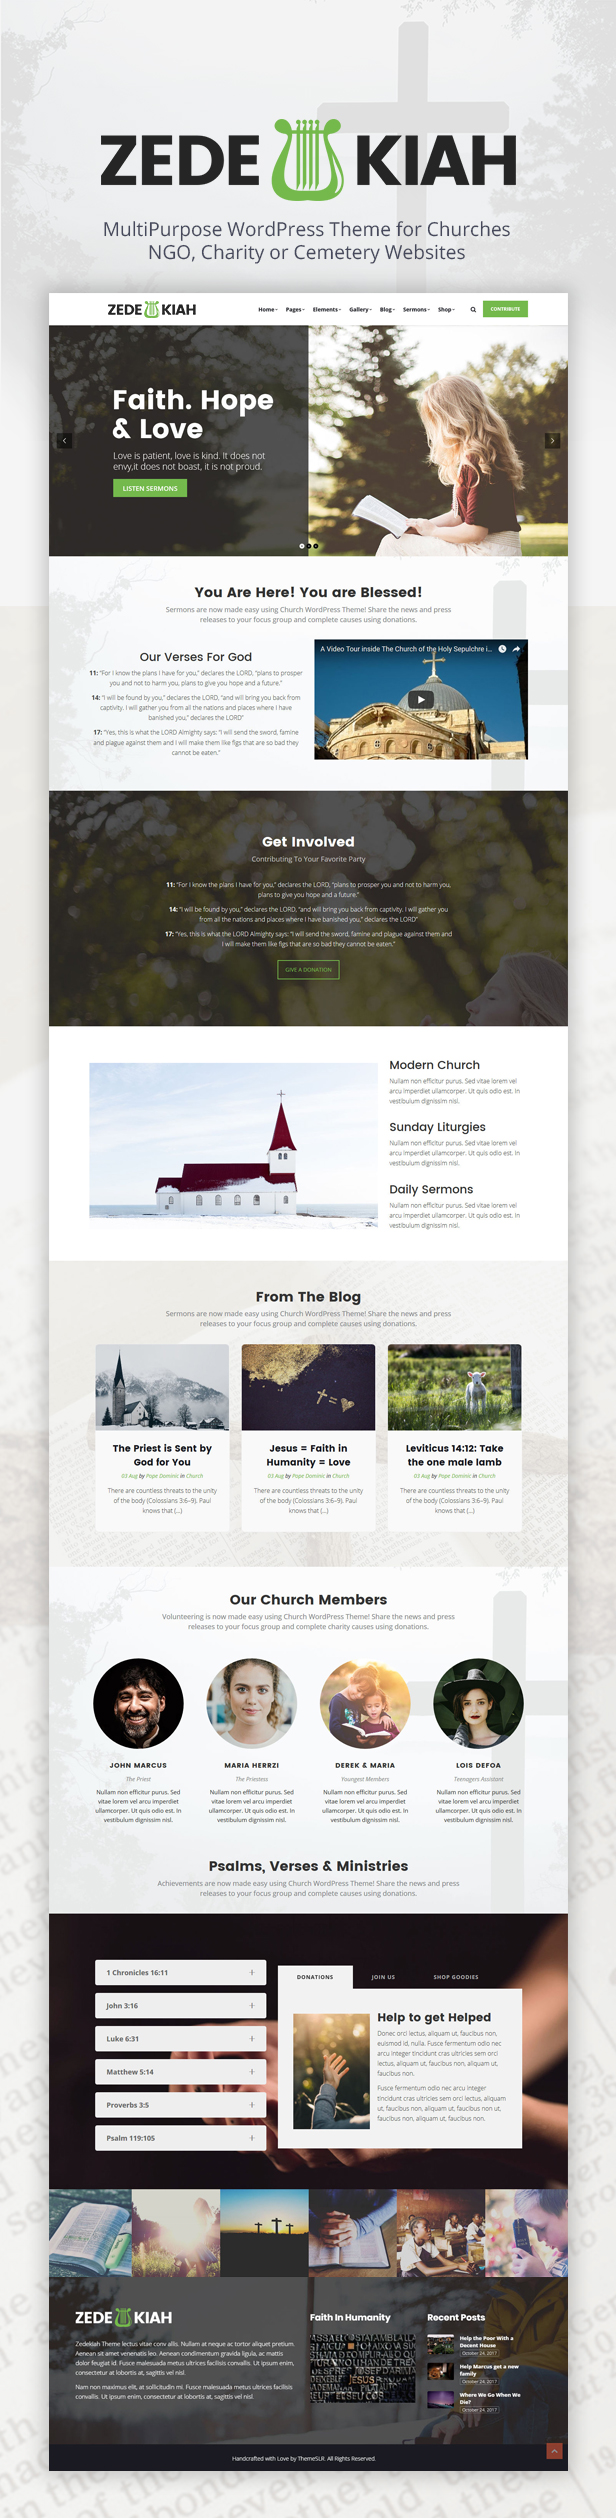 Images of WordPress site template pages.